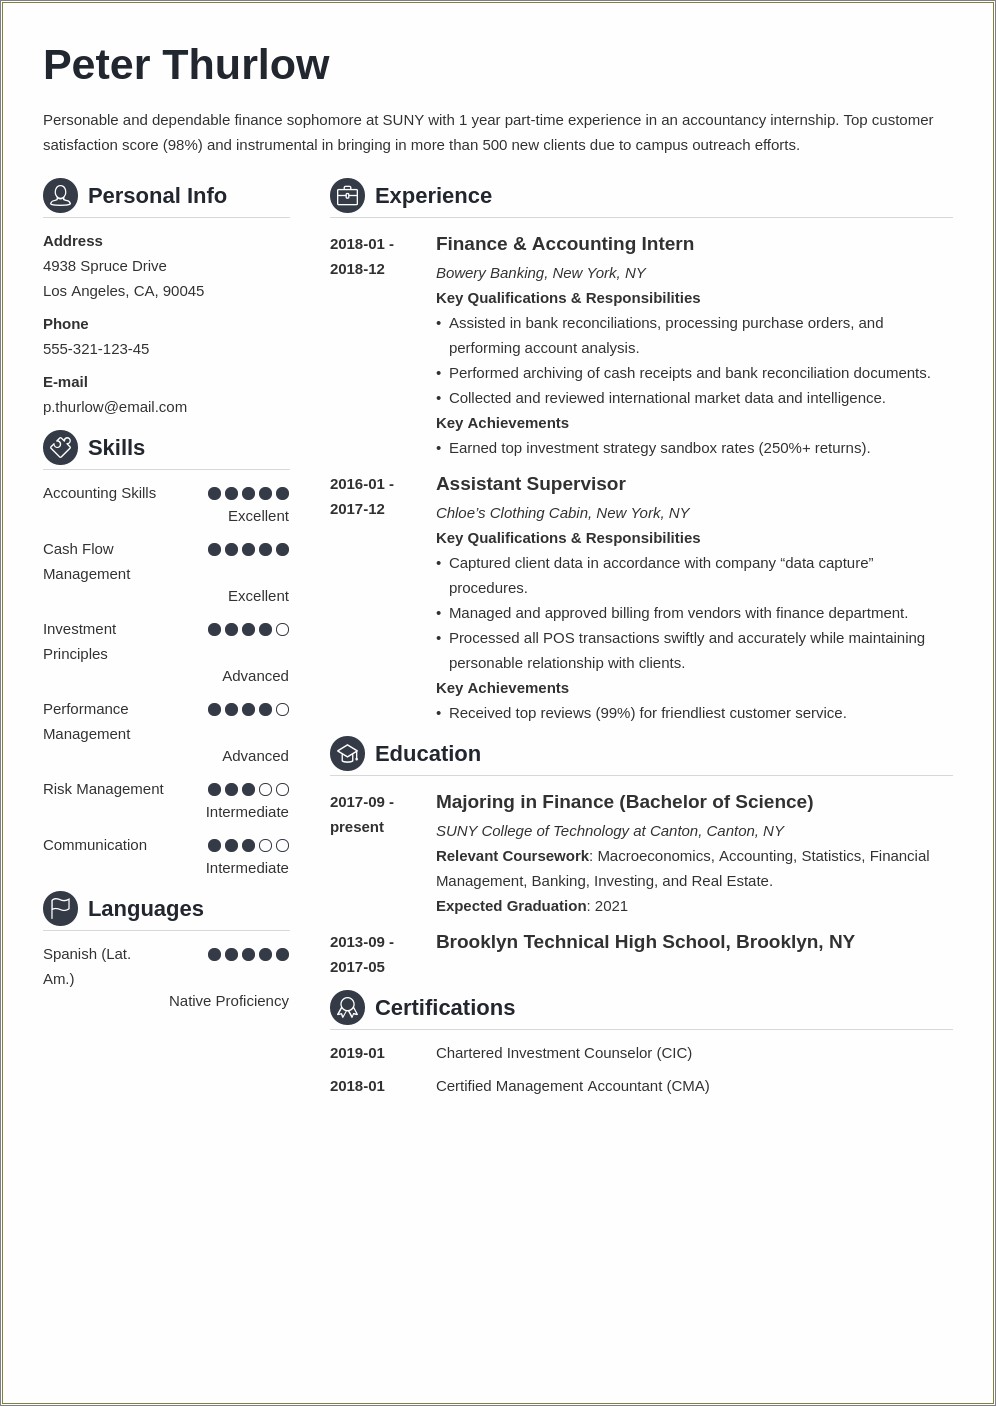 Resume Headers For Internships And Work